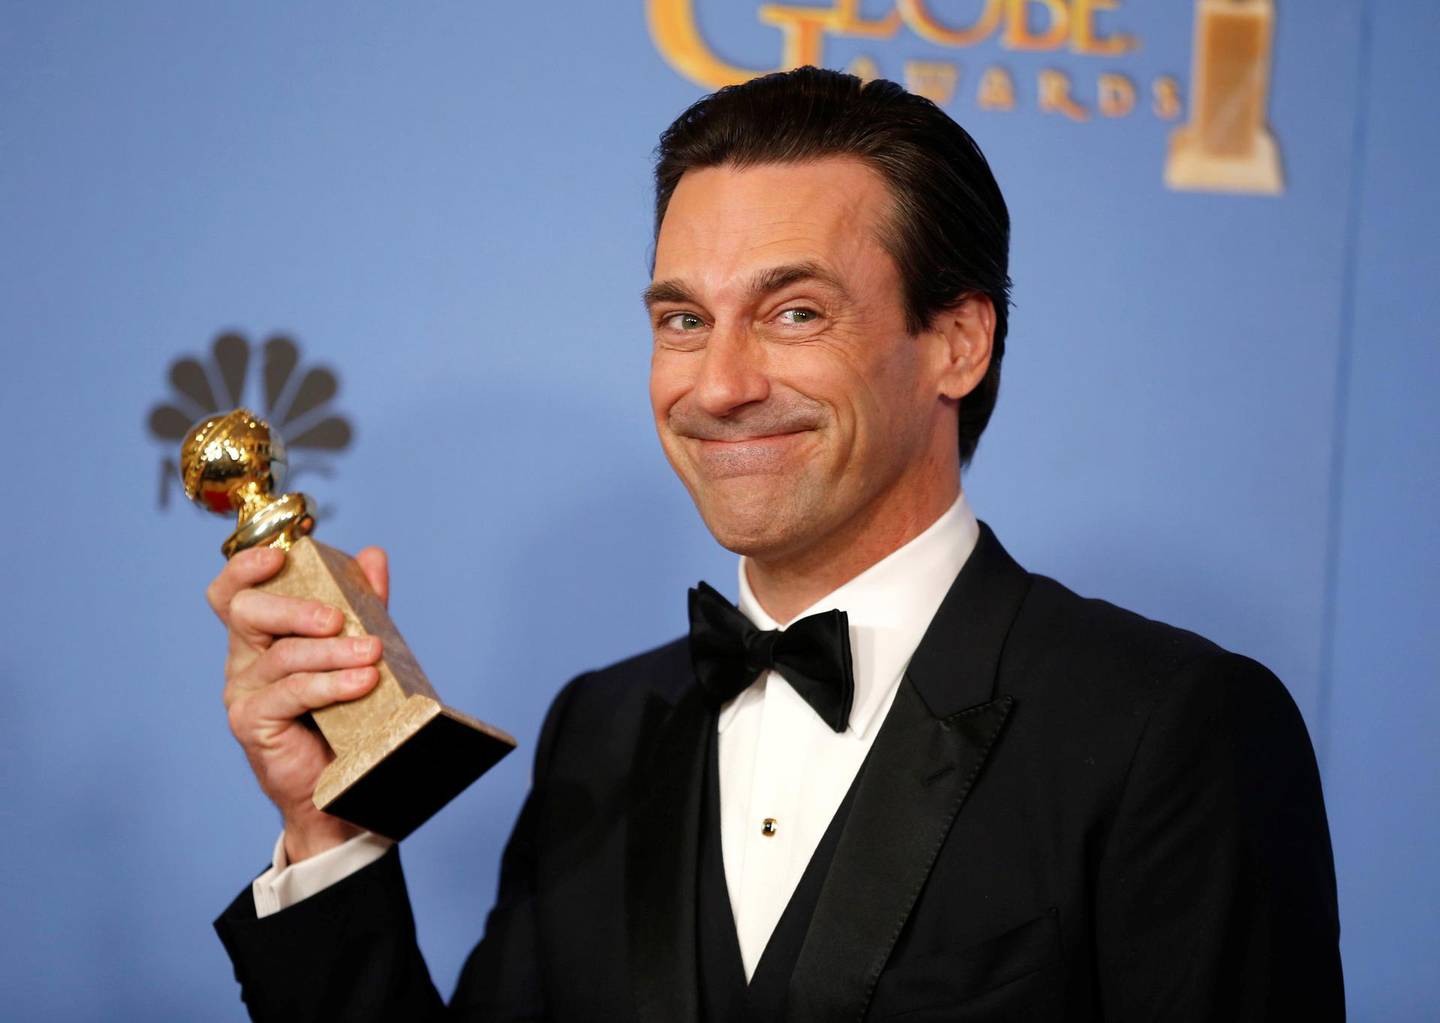 Jon Hamm poses backstage with his award for Best Performance by an Actor In A Television Series - Drama for his role in "Mad Men" at the 73rd Golden Globe Awards in Beverly Hills, California January 10, 2016.  REUTERS/Lucy Nicholson